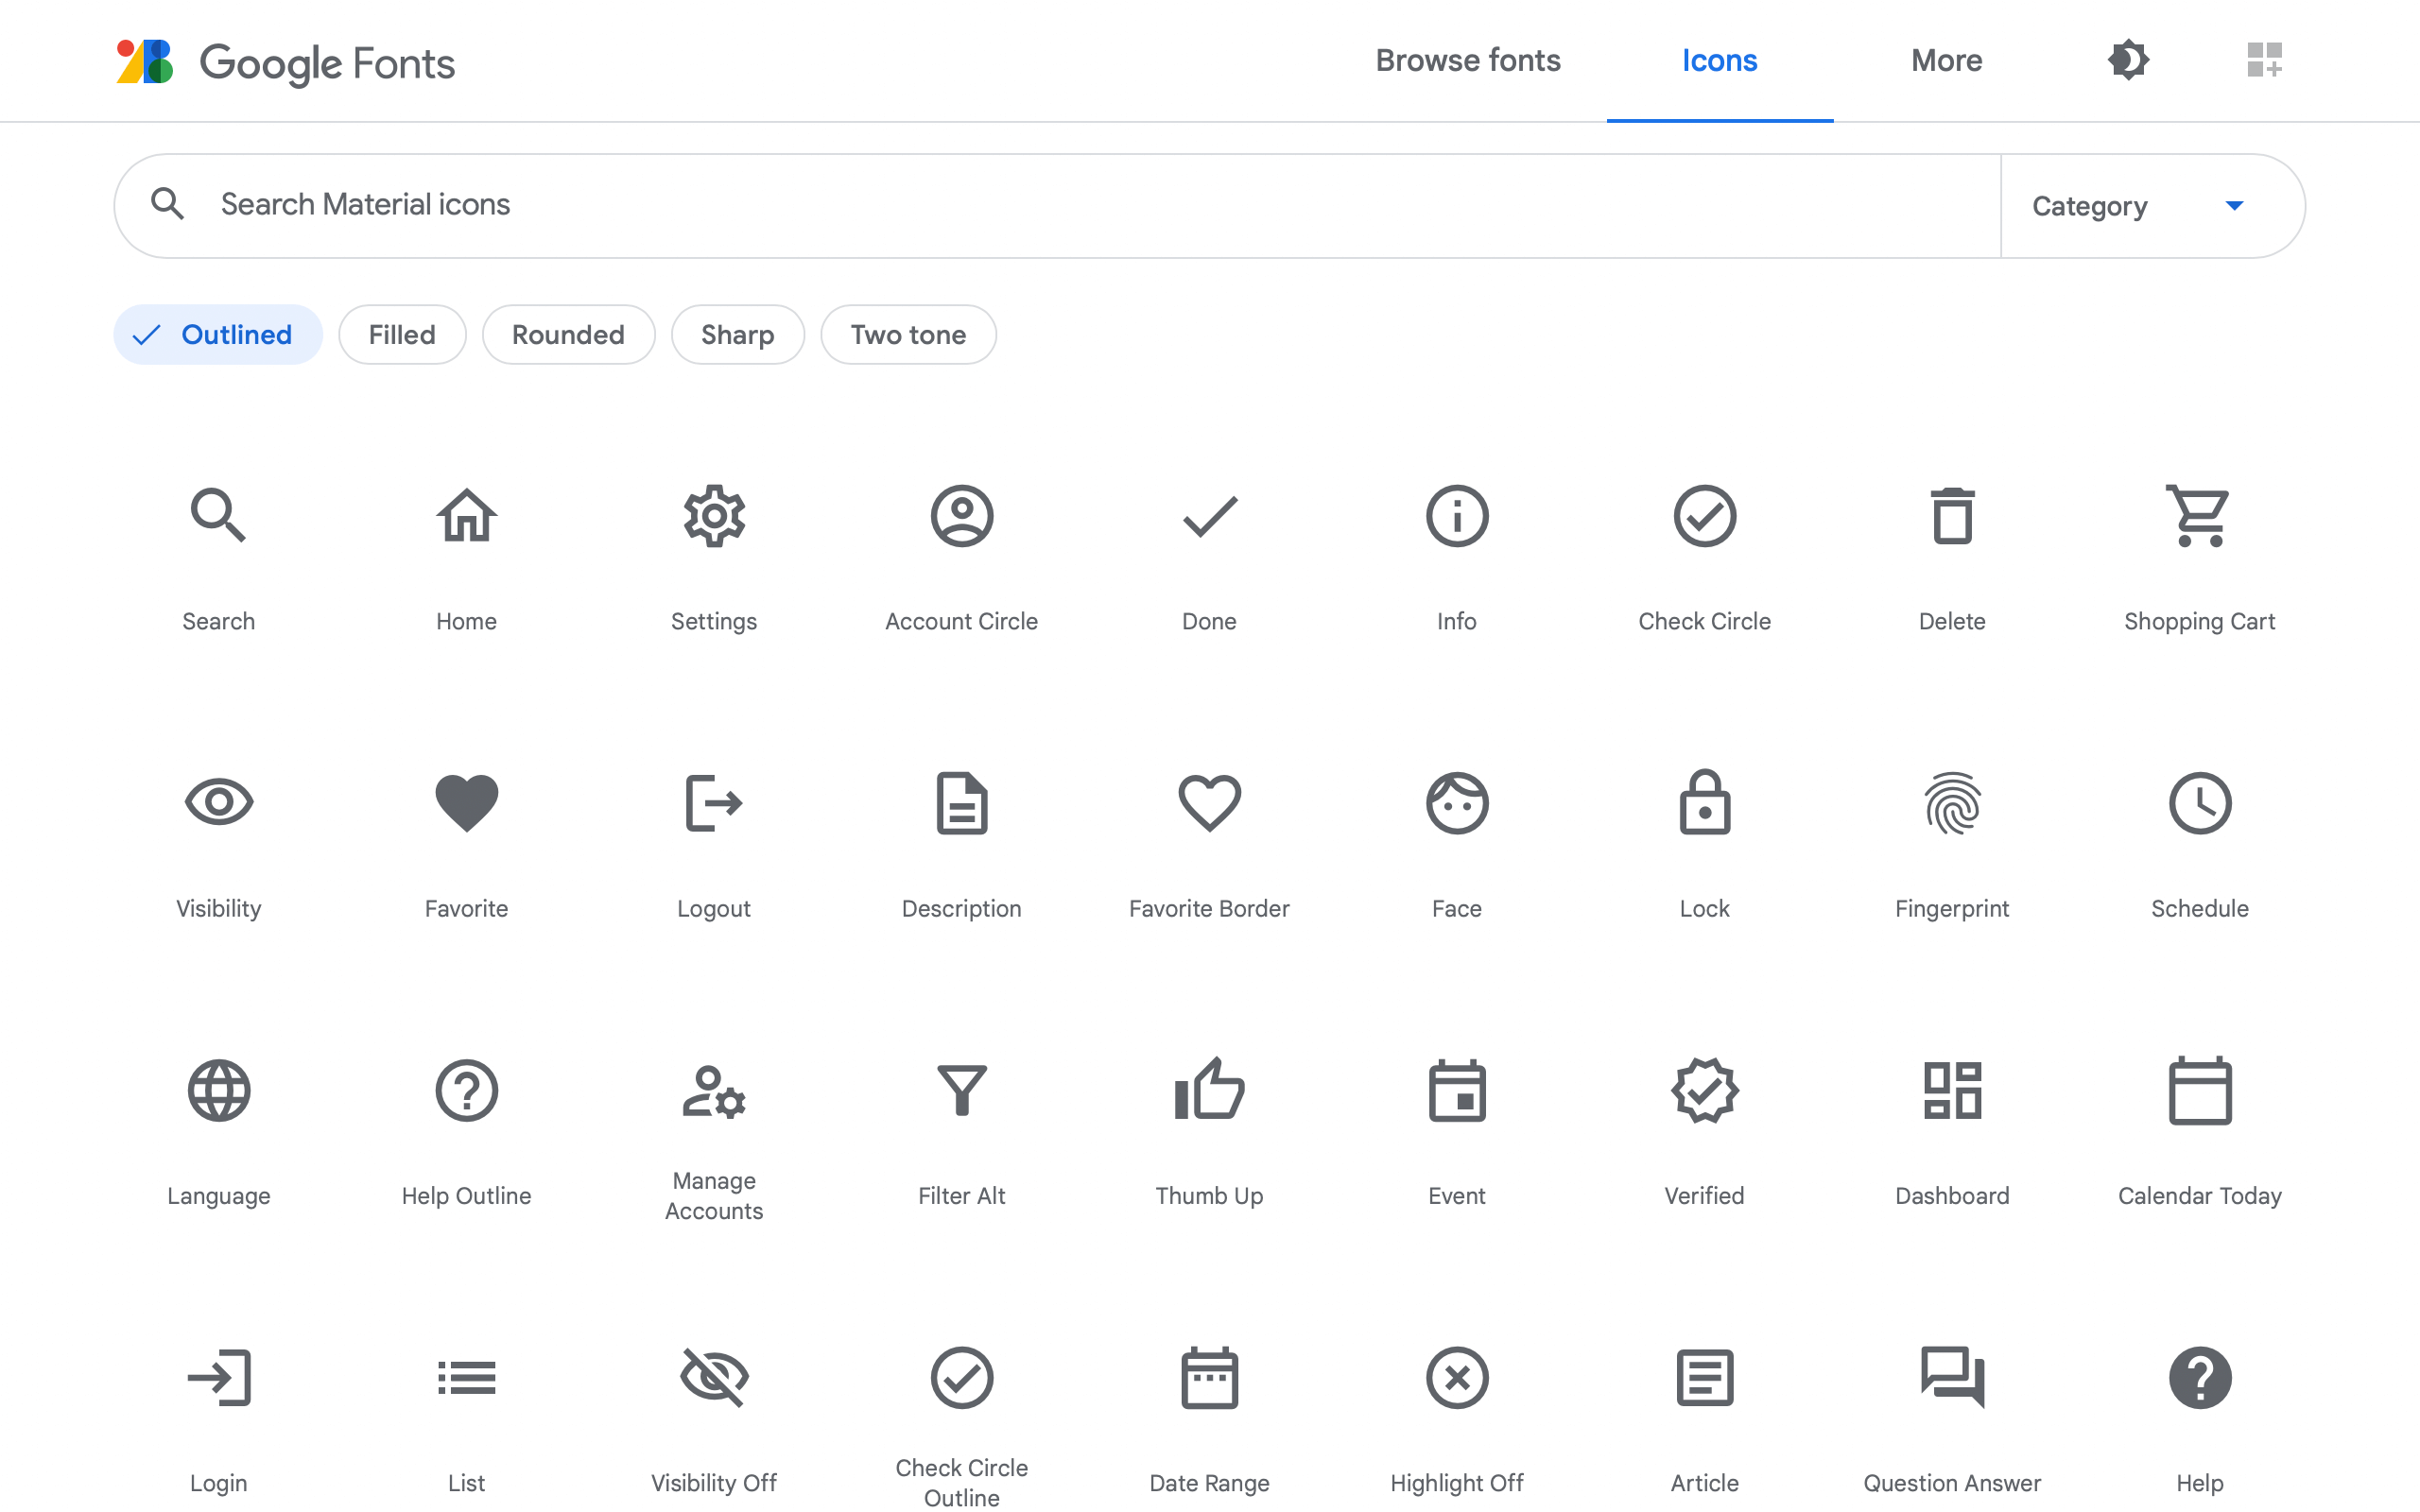 The Wikipedia Android app uses on Material Icons